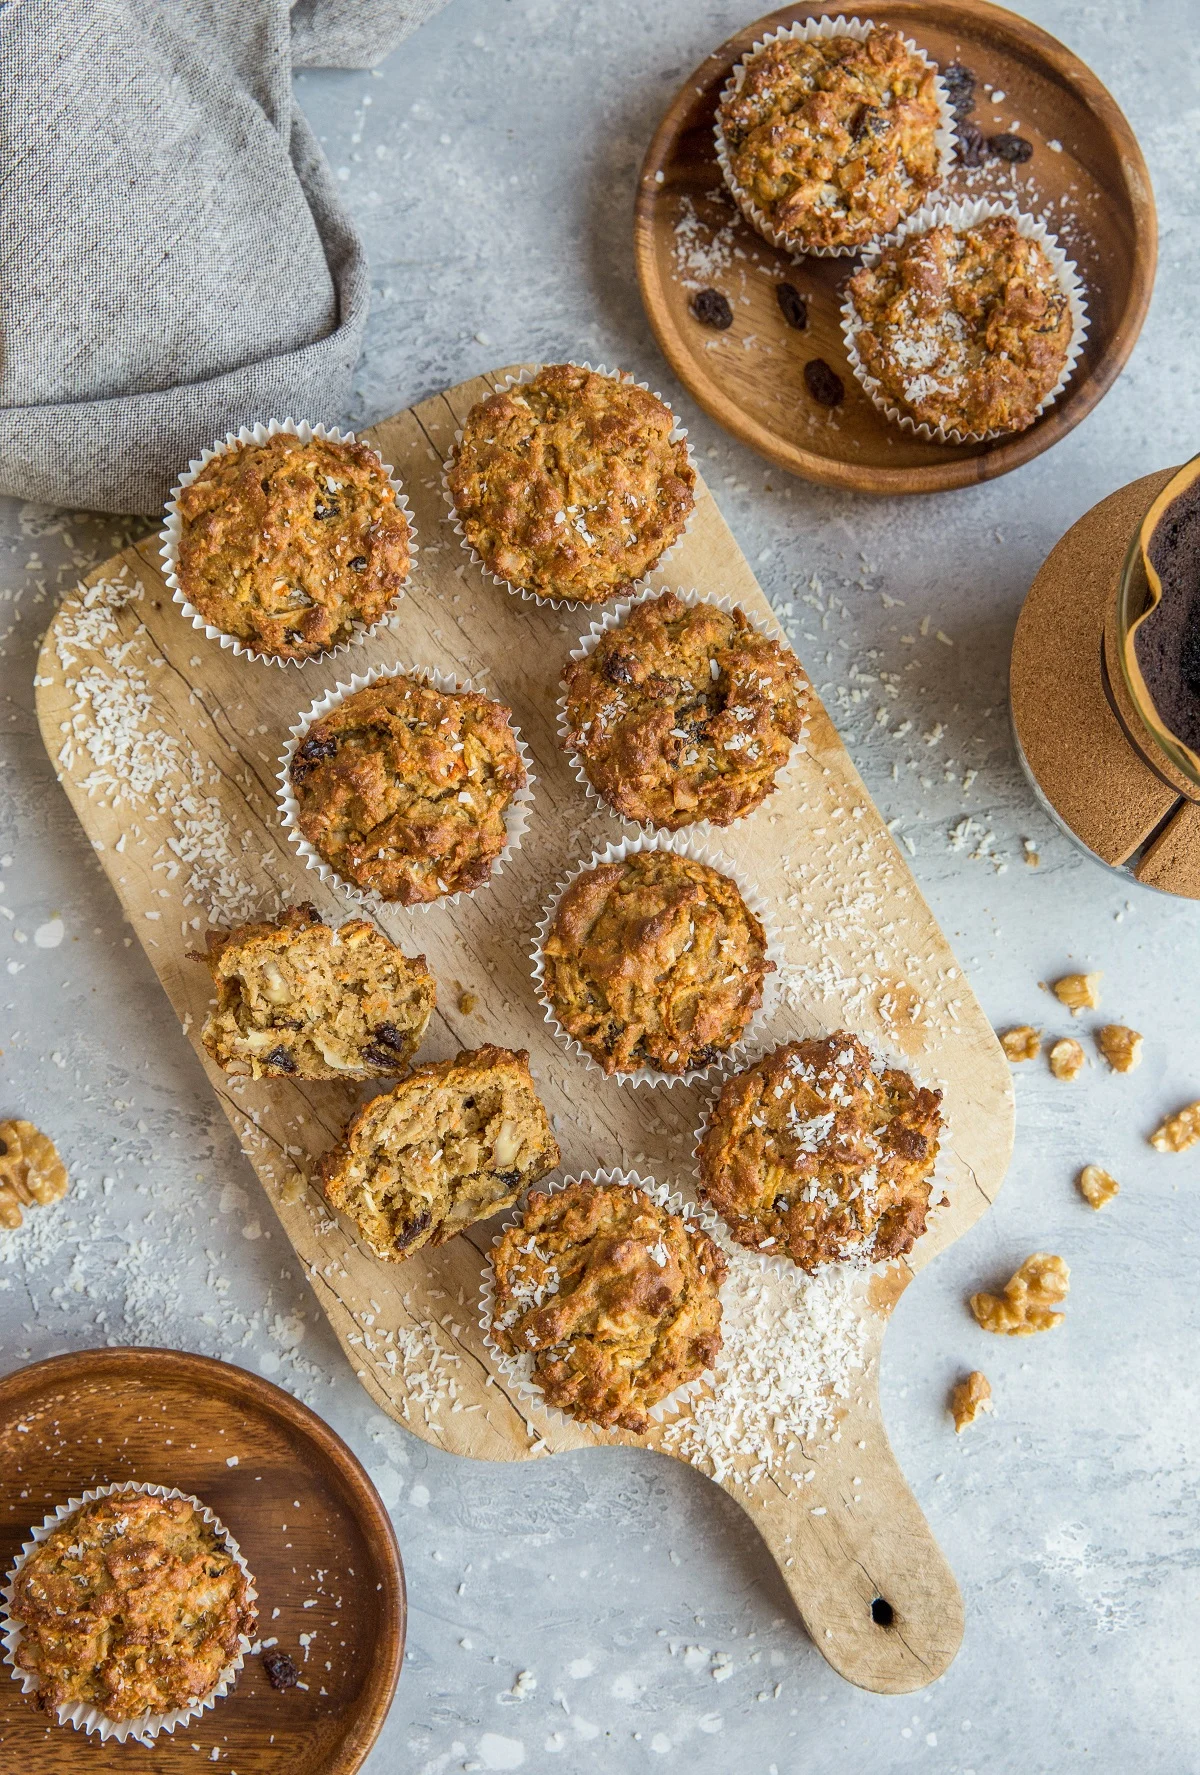 Grain-Free Morning Glory Muffins made with almond flour and coconut sugar. These healthy muffins are a great breakfast or snack. | TheRoastedRoot.com #glutenfree